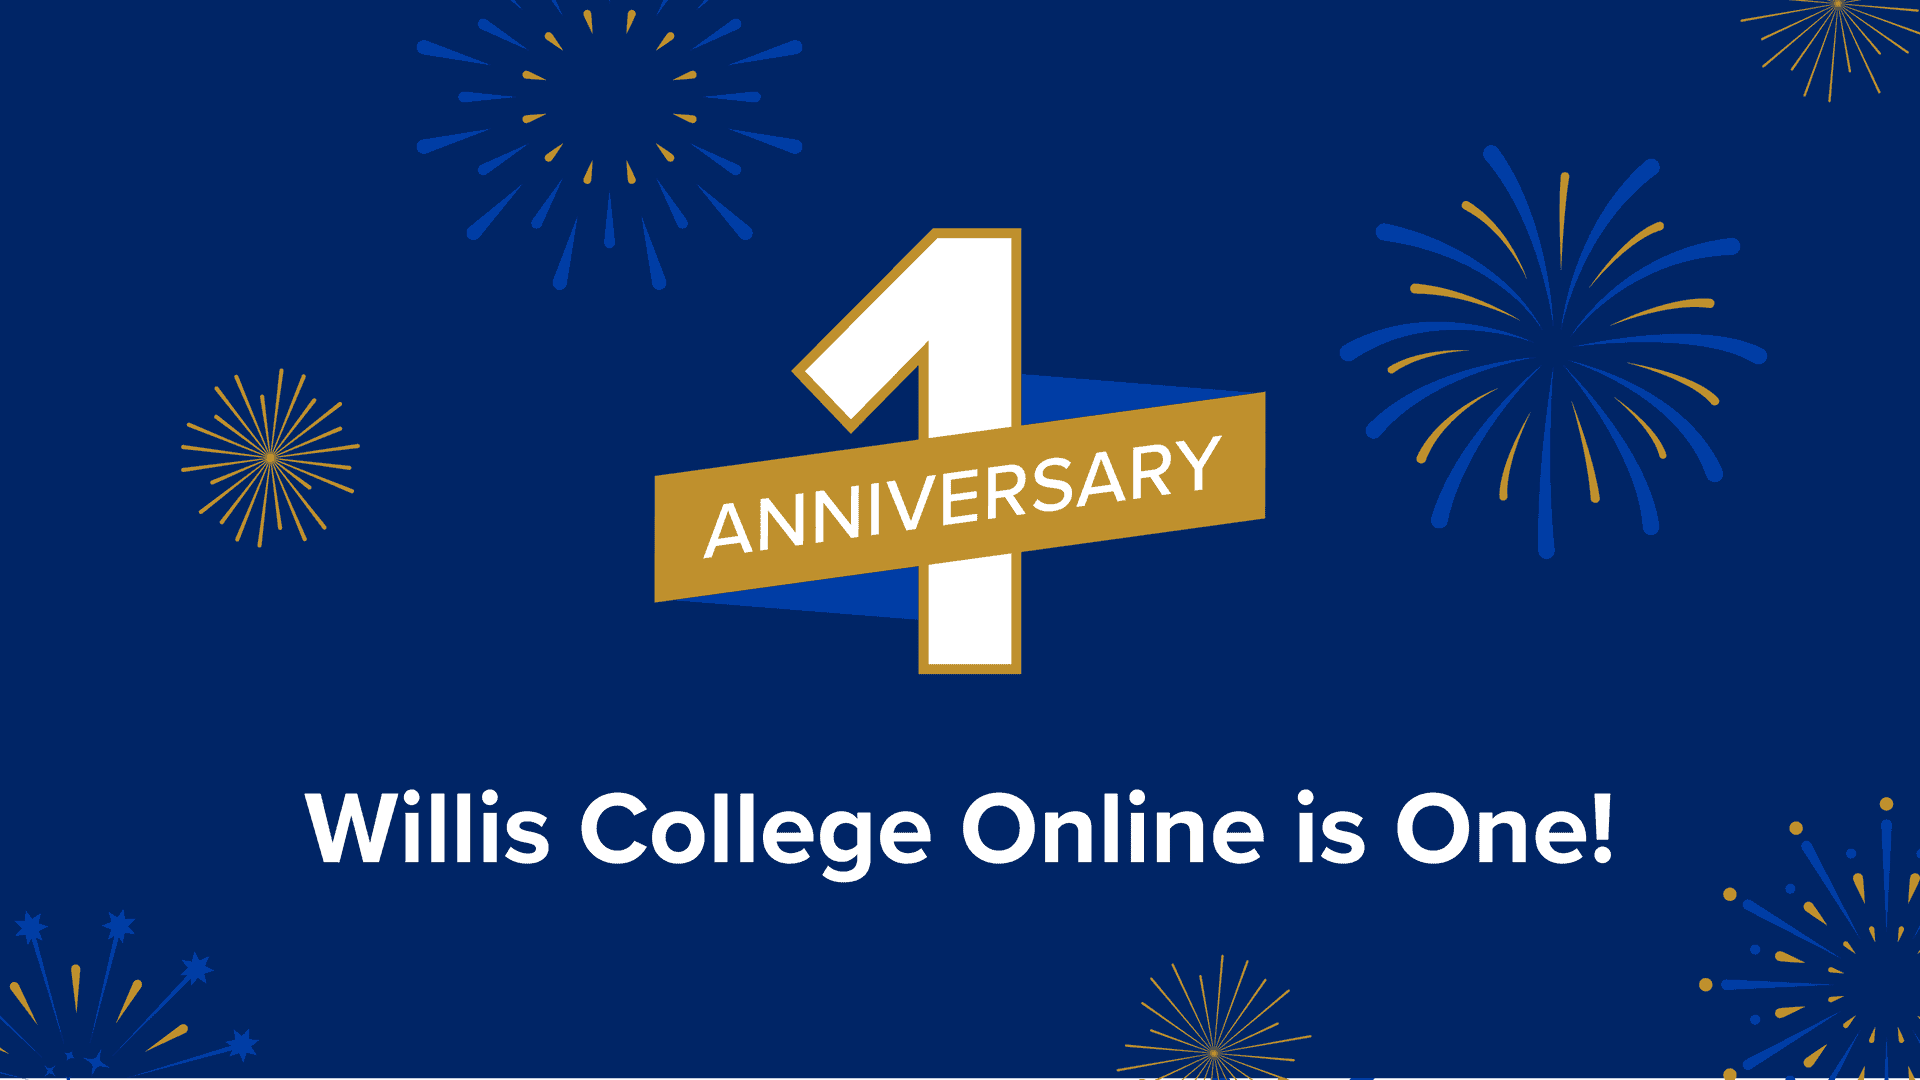 Featured image for “Willis College Online Turns One!”